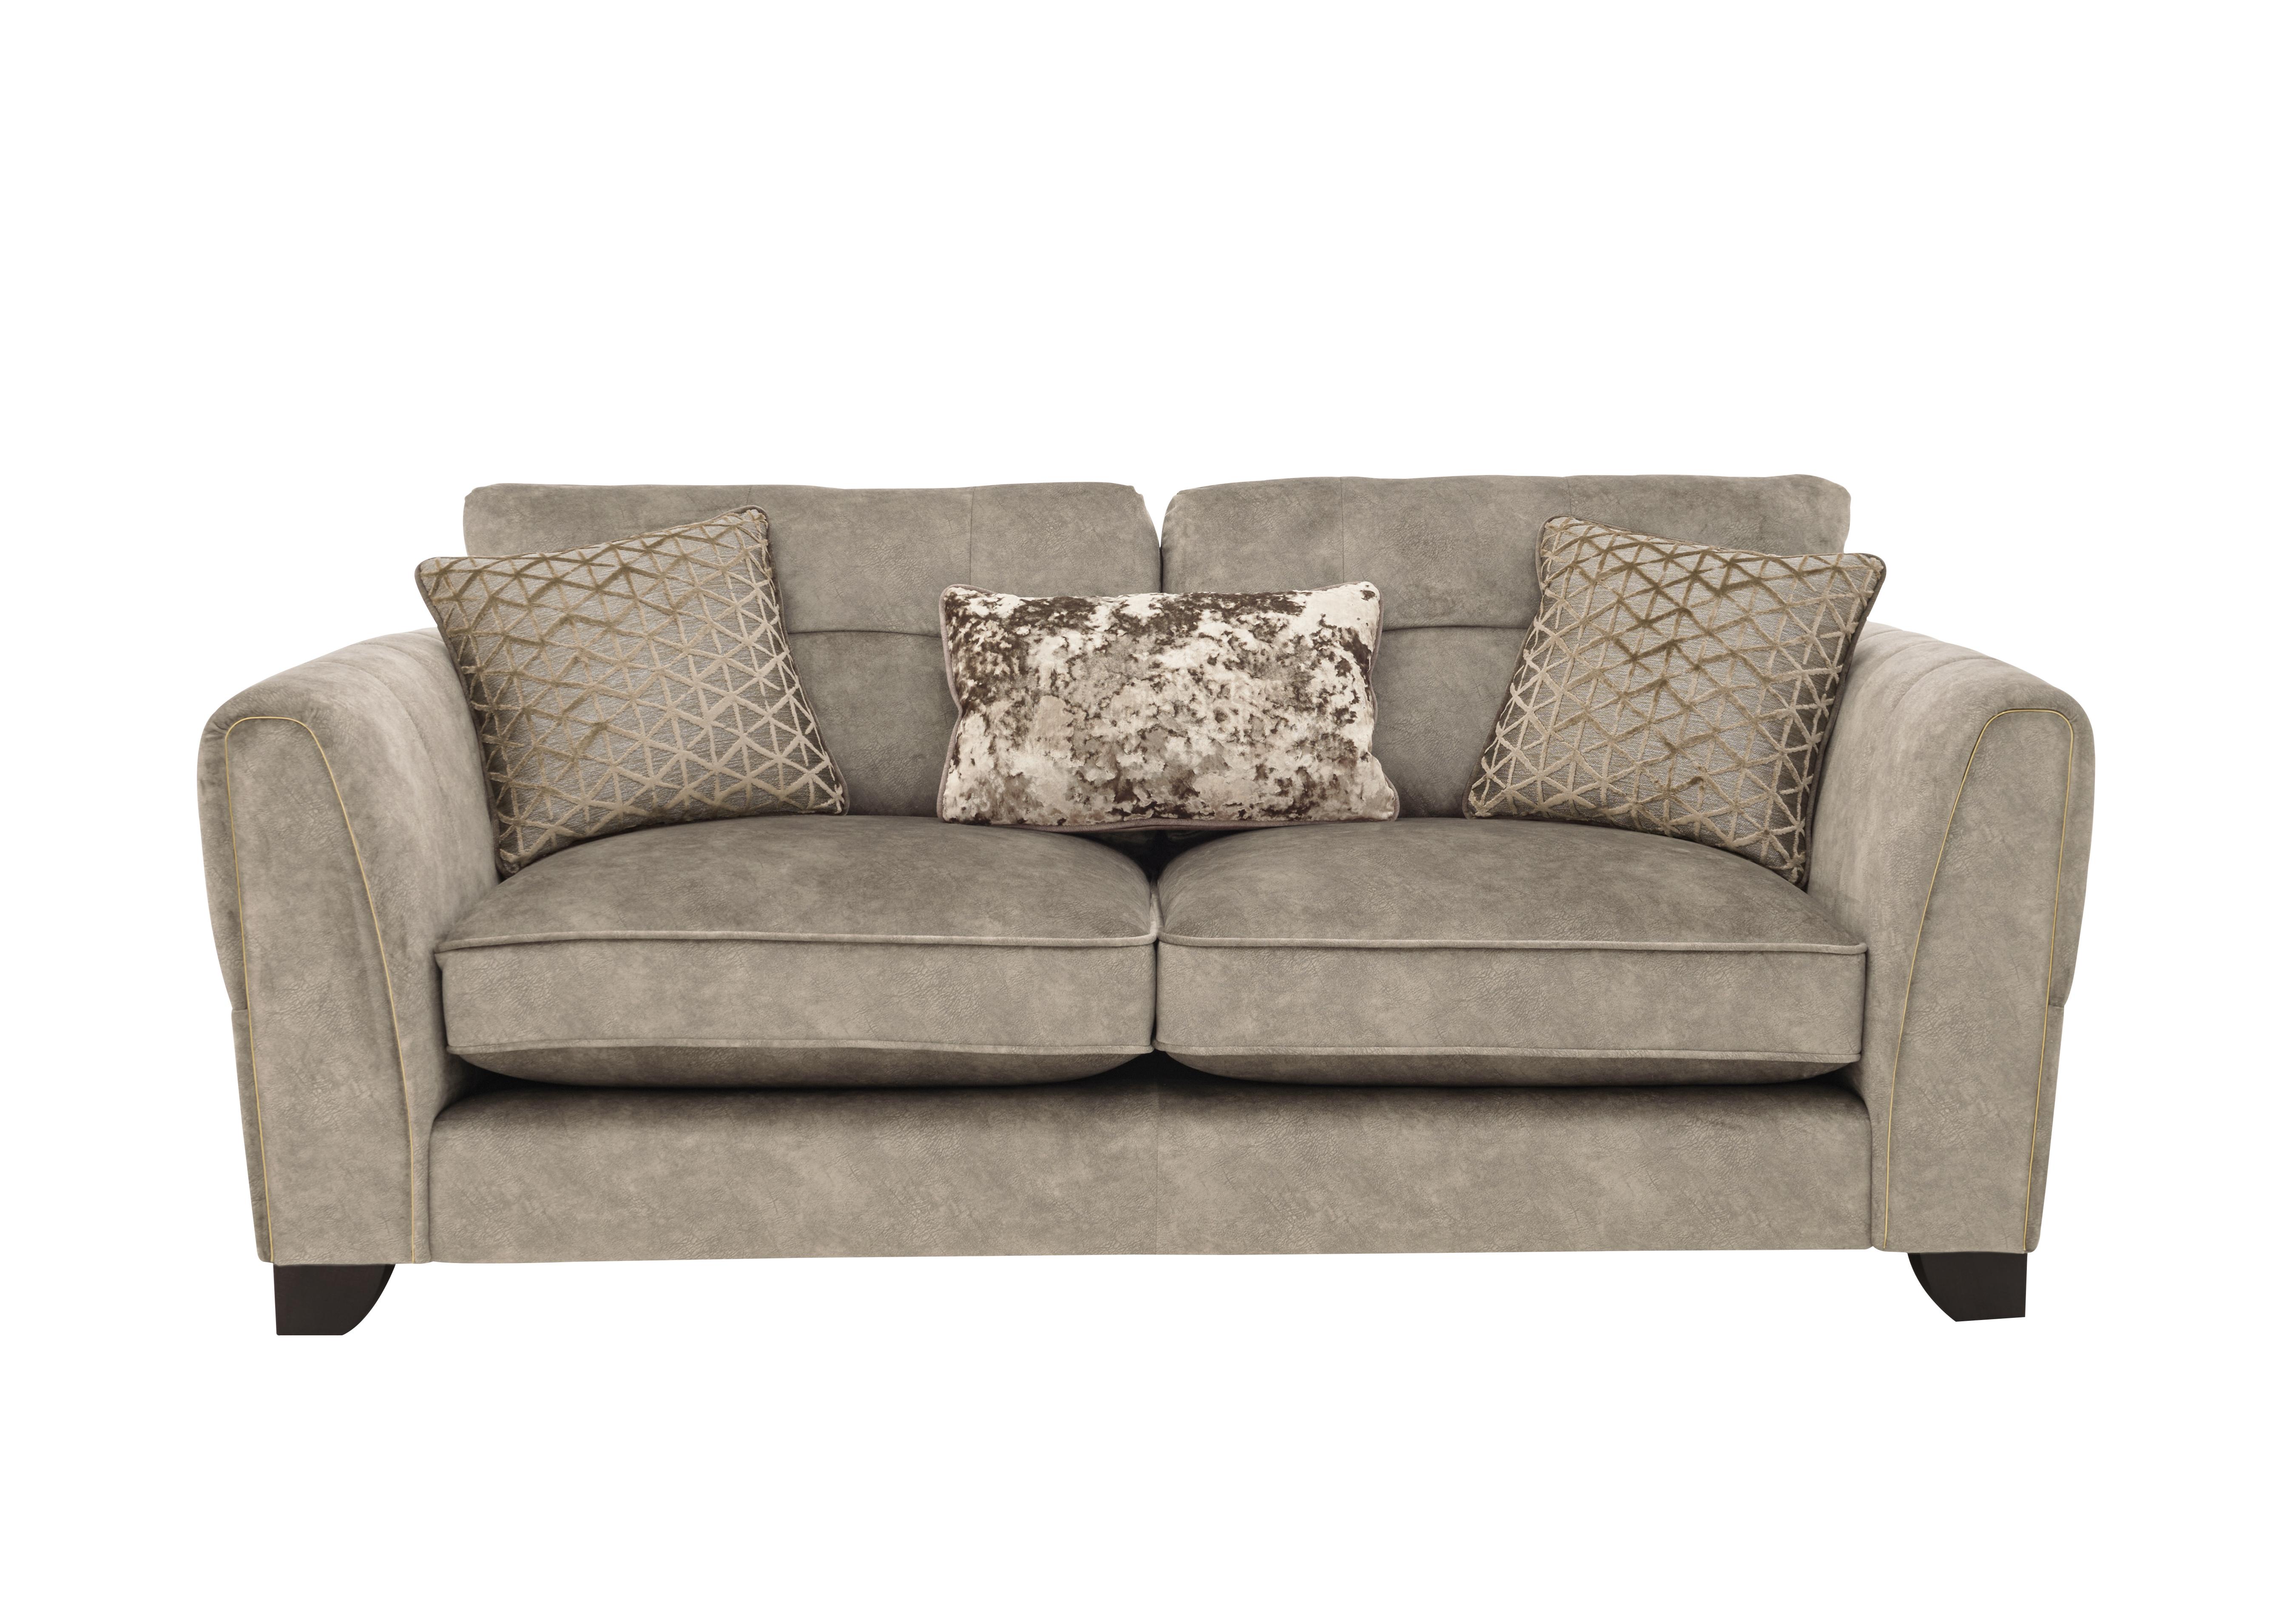 Ariana 3 Seater Fabric Classic Back Sofa in Dapple Oyster Brass Insert on Furniture Village